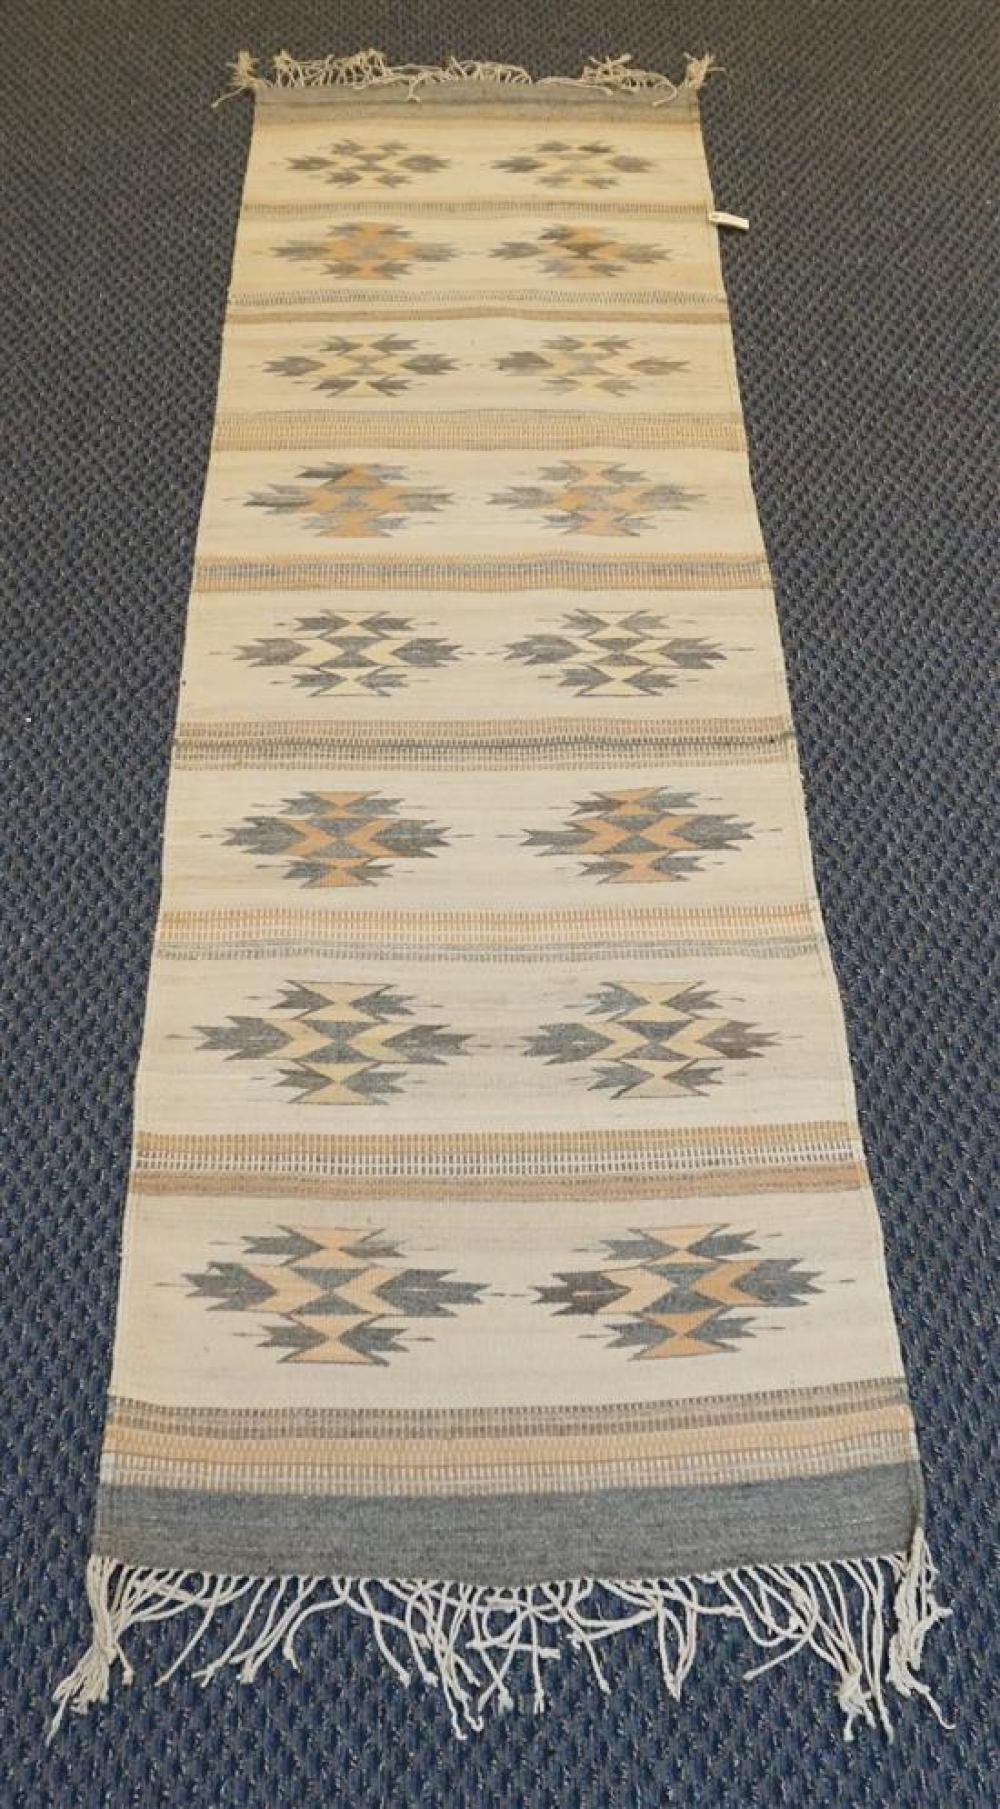 MEXICAN FLAT WOVEN RUG 9 FT 6 3212ca